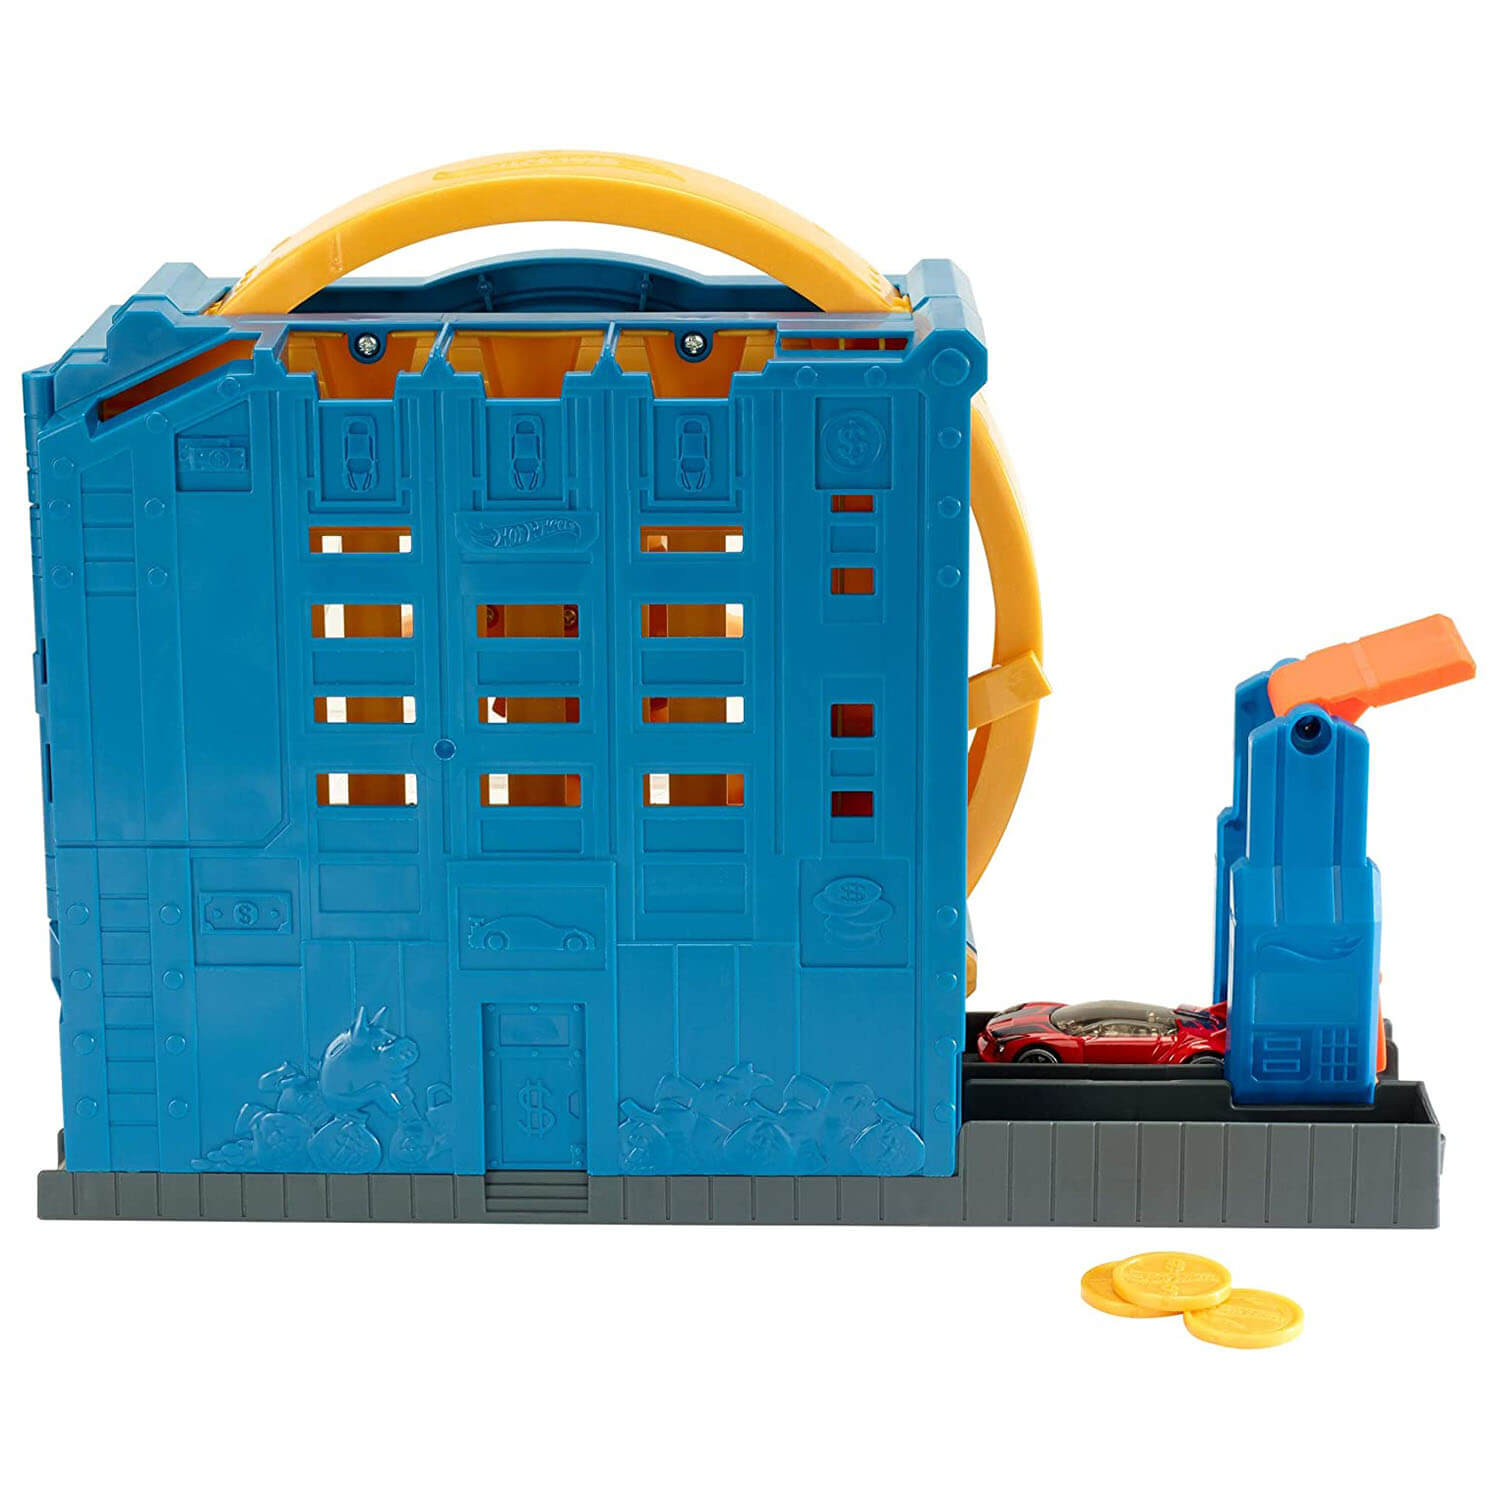 Back view of the hot wheels bank playset.